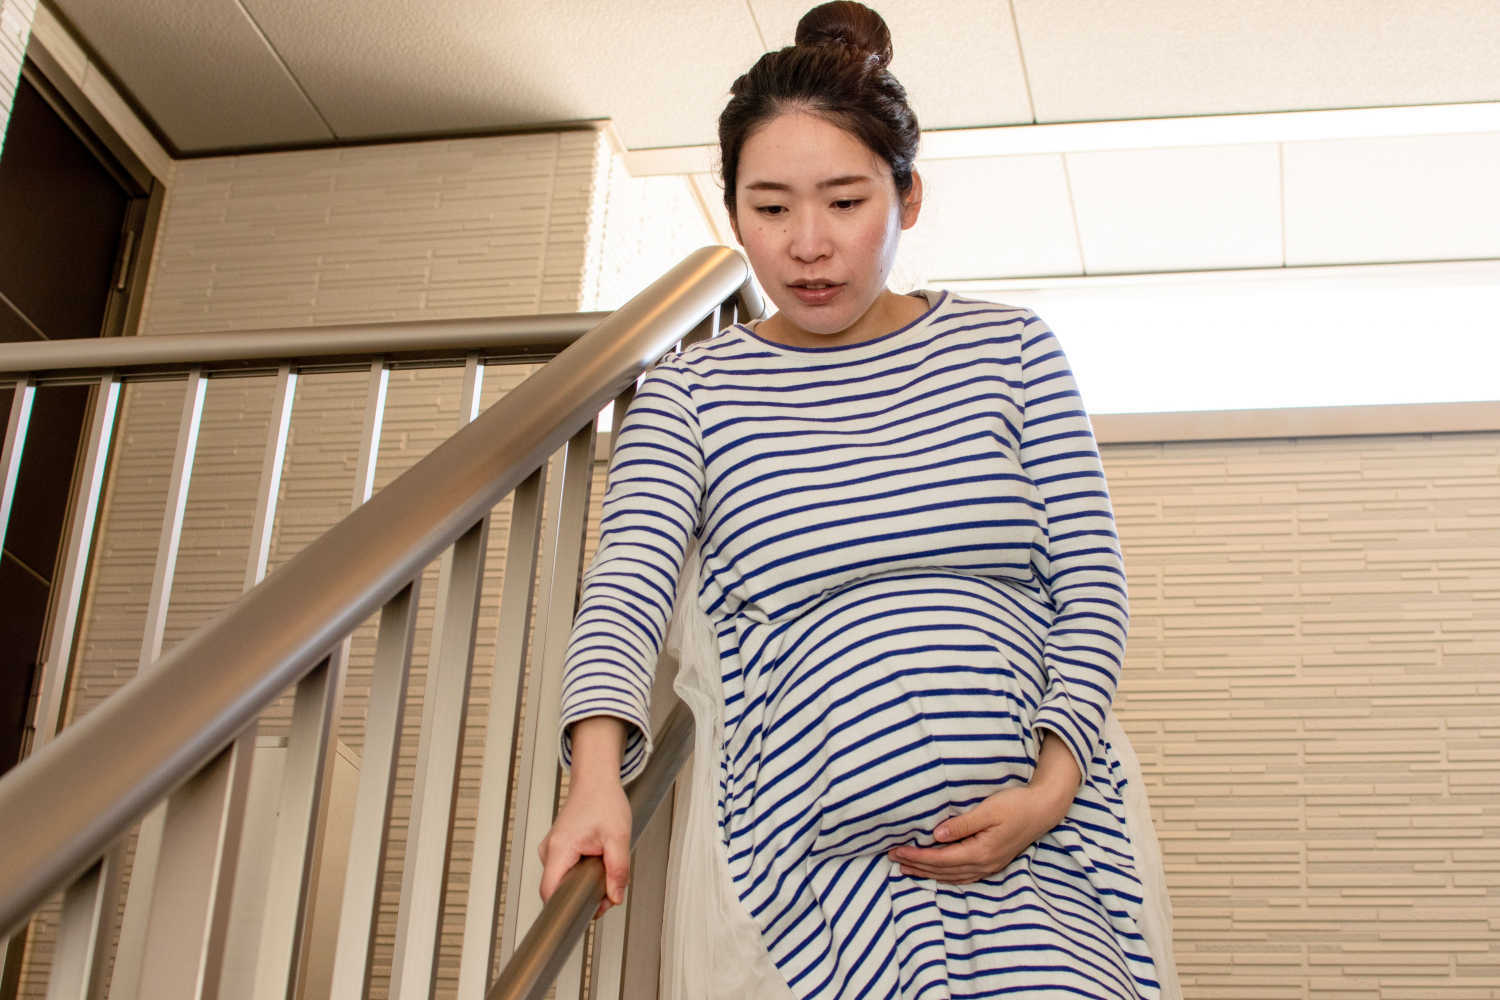 woman being cautious to overcome clumsiness during pregnancy